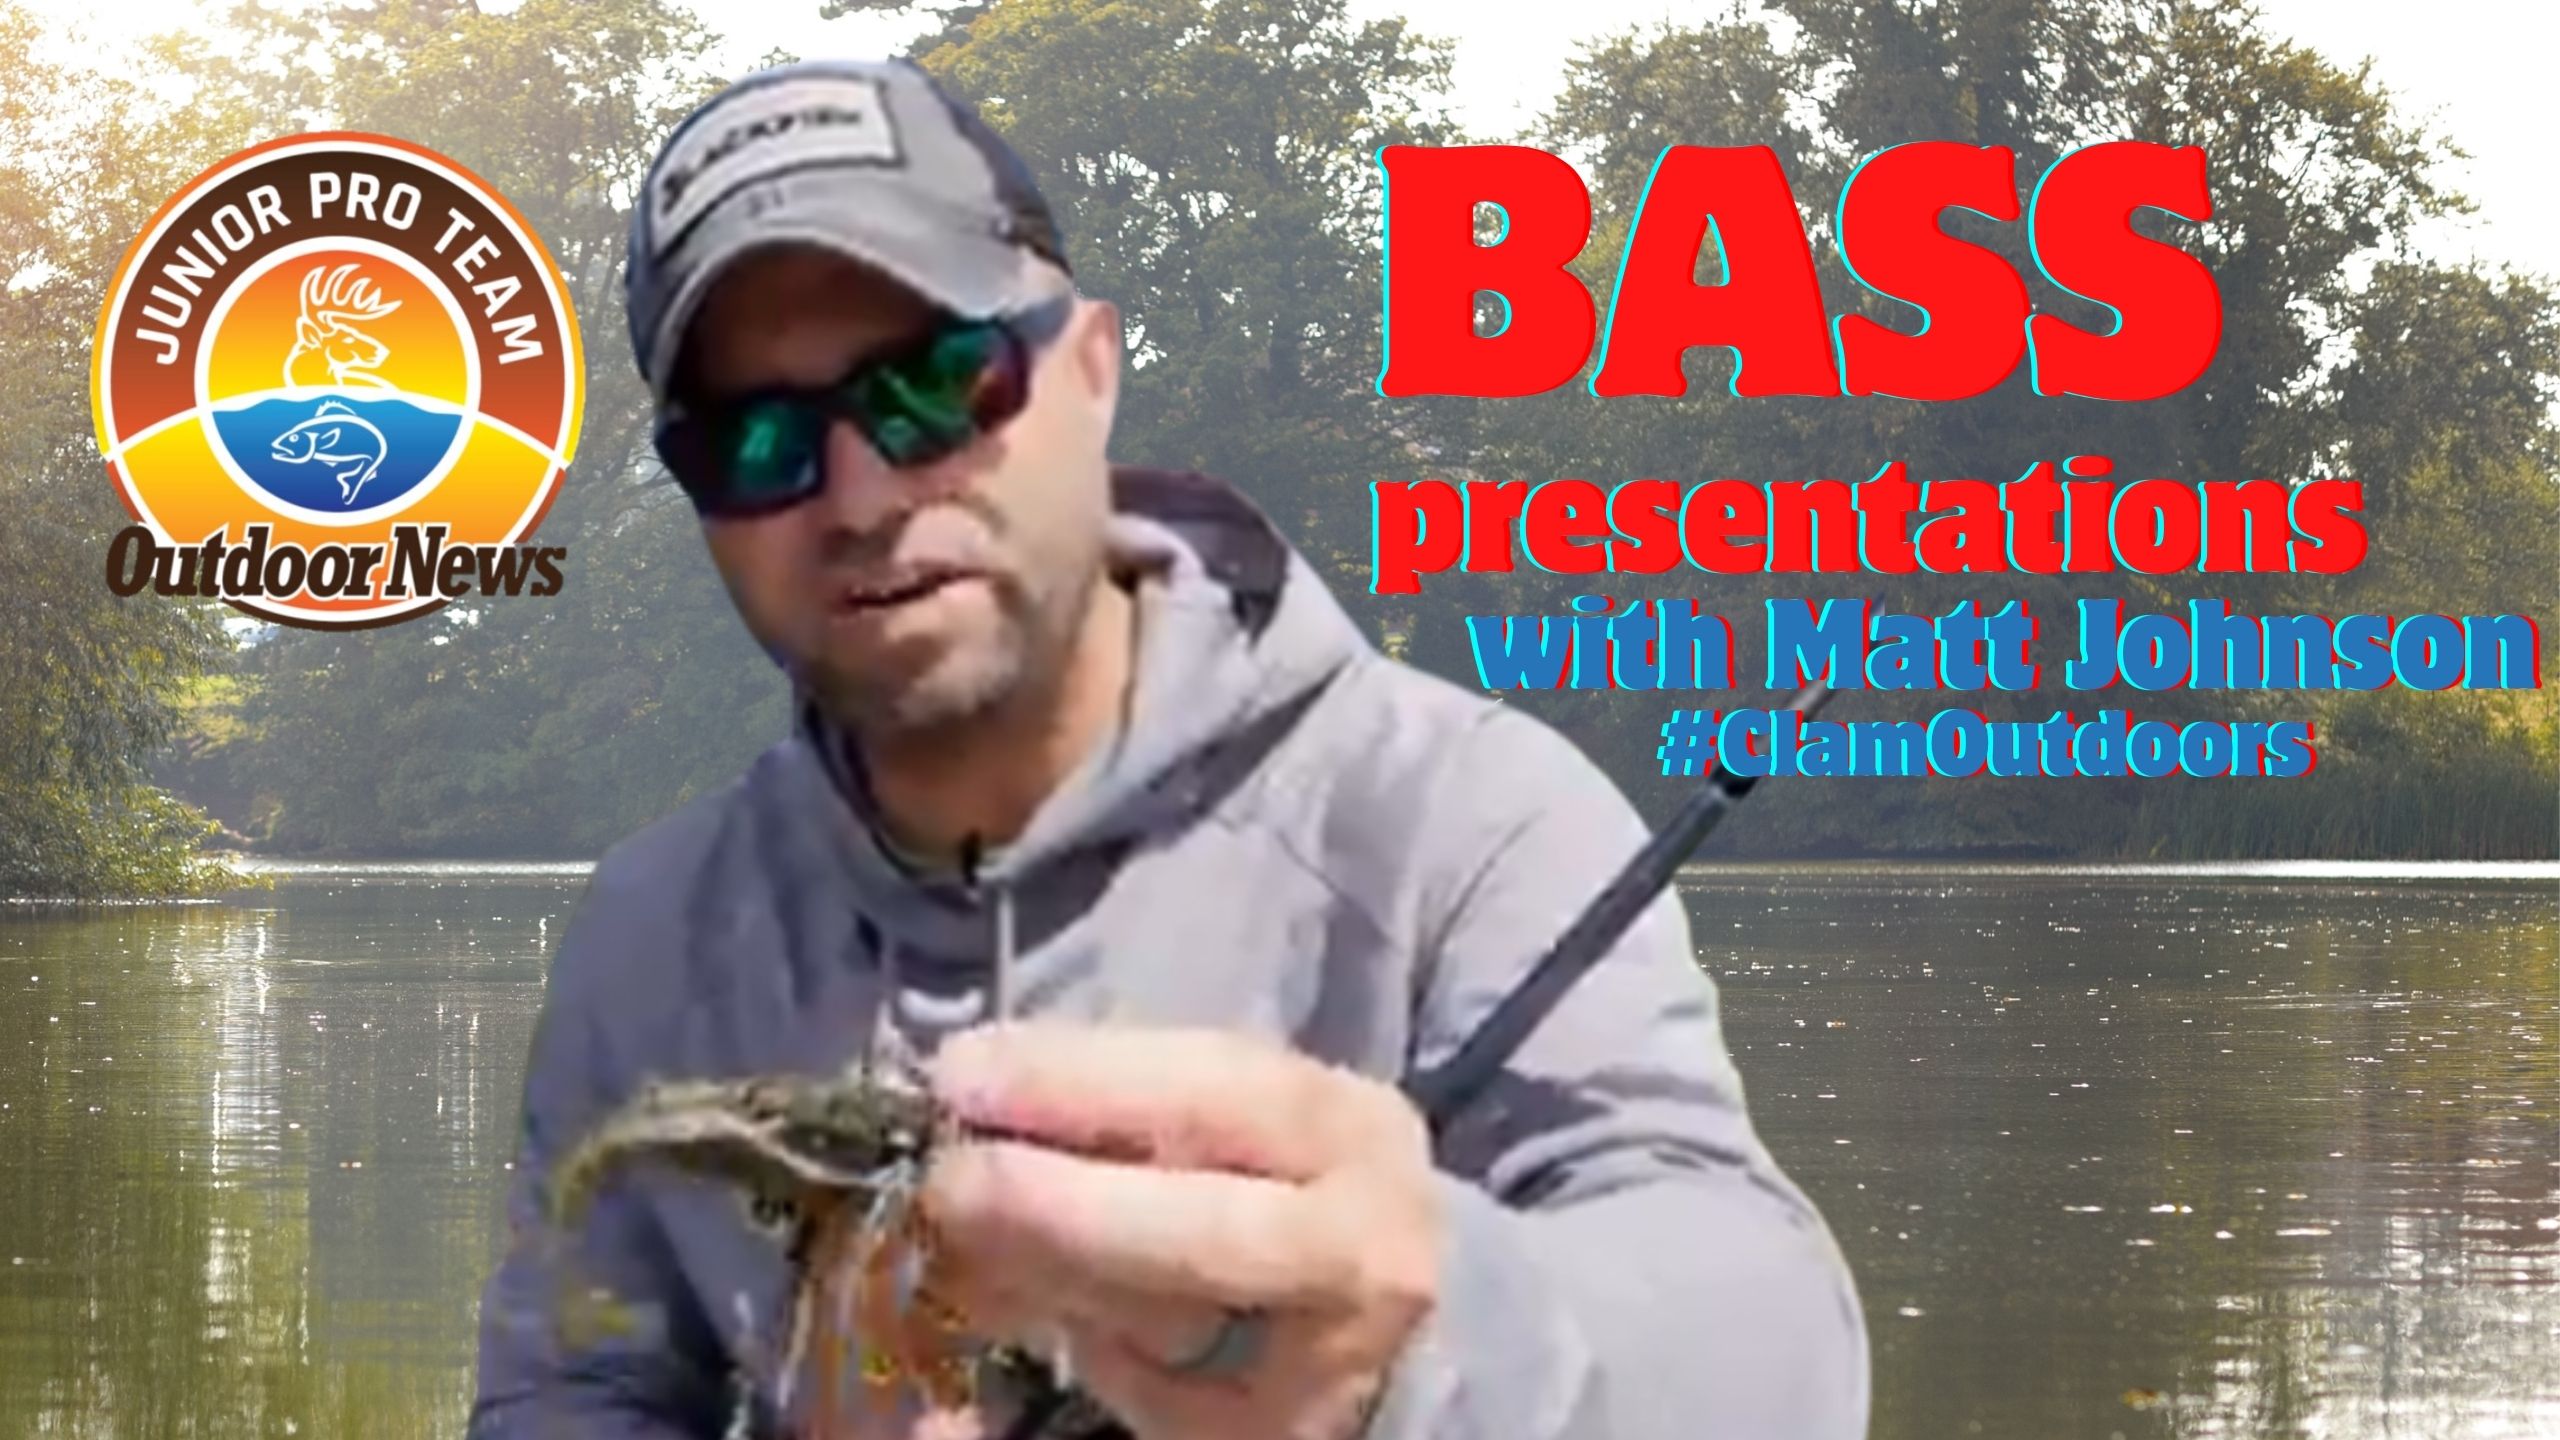 Matt Johnson with Clam Outdoors breaks it down all terrain presentations for us. This guy is a hardcore angler, and in this video, he shares his expertise with JPT members on the different types of bass lures. He shows you the lure, explains how it is designed to function, and ways to offer the presentation so bass gobble them up! There’s so many choices and lure types: Moving Baits – these are what you hear referred as chatter baits, swim jigs, spinner baits, small swim baits. And they all have something in common - blades, paddles – something that needs to be engaged when you fish this lure. This is a versatile bait for shallow or deep water, that cast and then they are retrieved back to the boat. Crank Baits –They are designed to fish at a specific depth. Some float, some dive 20 fee, some dive 3 feet, some suspend. You’ll see these as both lipped and lipless, and they come in a multitude of colors. Thrown at a specific depth to fish, they have multiple treble hooks giving you different points to hook the fish. Top Water – Lots of anglers love to fish top waters for the action you get when a big bass nails that lure fished along the water’s surface. They are excellent for fishing shallows, lily pads and areas of vegetation. In the top water category, you’ll see frog lures, poppers, floating worms, prop baits. A great option. Soft Plastics – A popular way to fish bass. Texas rig – a weedless presentation that can be fished in weedless fashion. Around cover, docks, milfoil, weeds this is a great option. A jig worm presentation will sink. The Ned Rig presentation is a smaller more finesse presentation of the jig. A Wacky Rig a small plastic stick bait, you cast and let it marinate. Bass can’t resist this one. This isn’t a comprehensive list, but it will sure get you started!